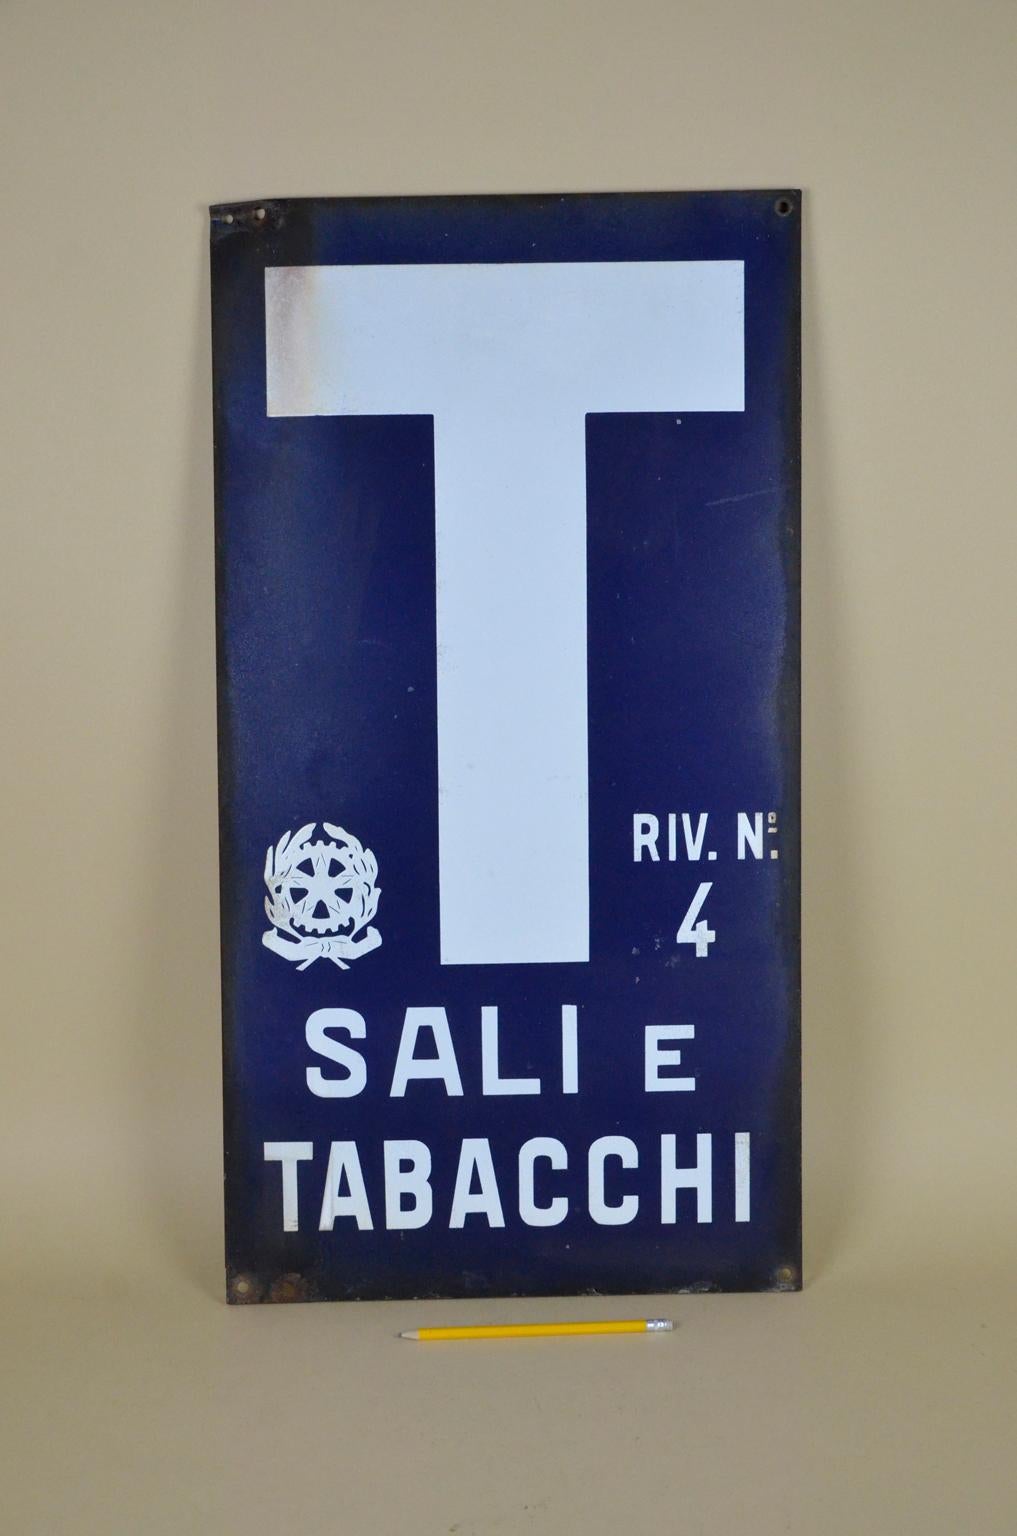 This vintage enamel tobacco sign was used by small shops in Italy selling state-monopoly products such as tobacco and cigarettes but also salt and stamps.
The number four on the right-hand side is the official license number referring to the